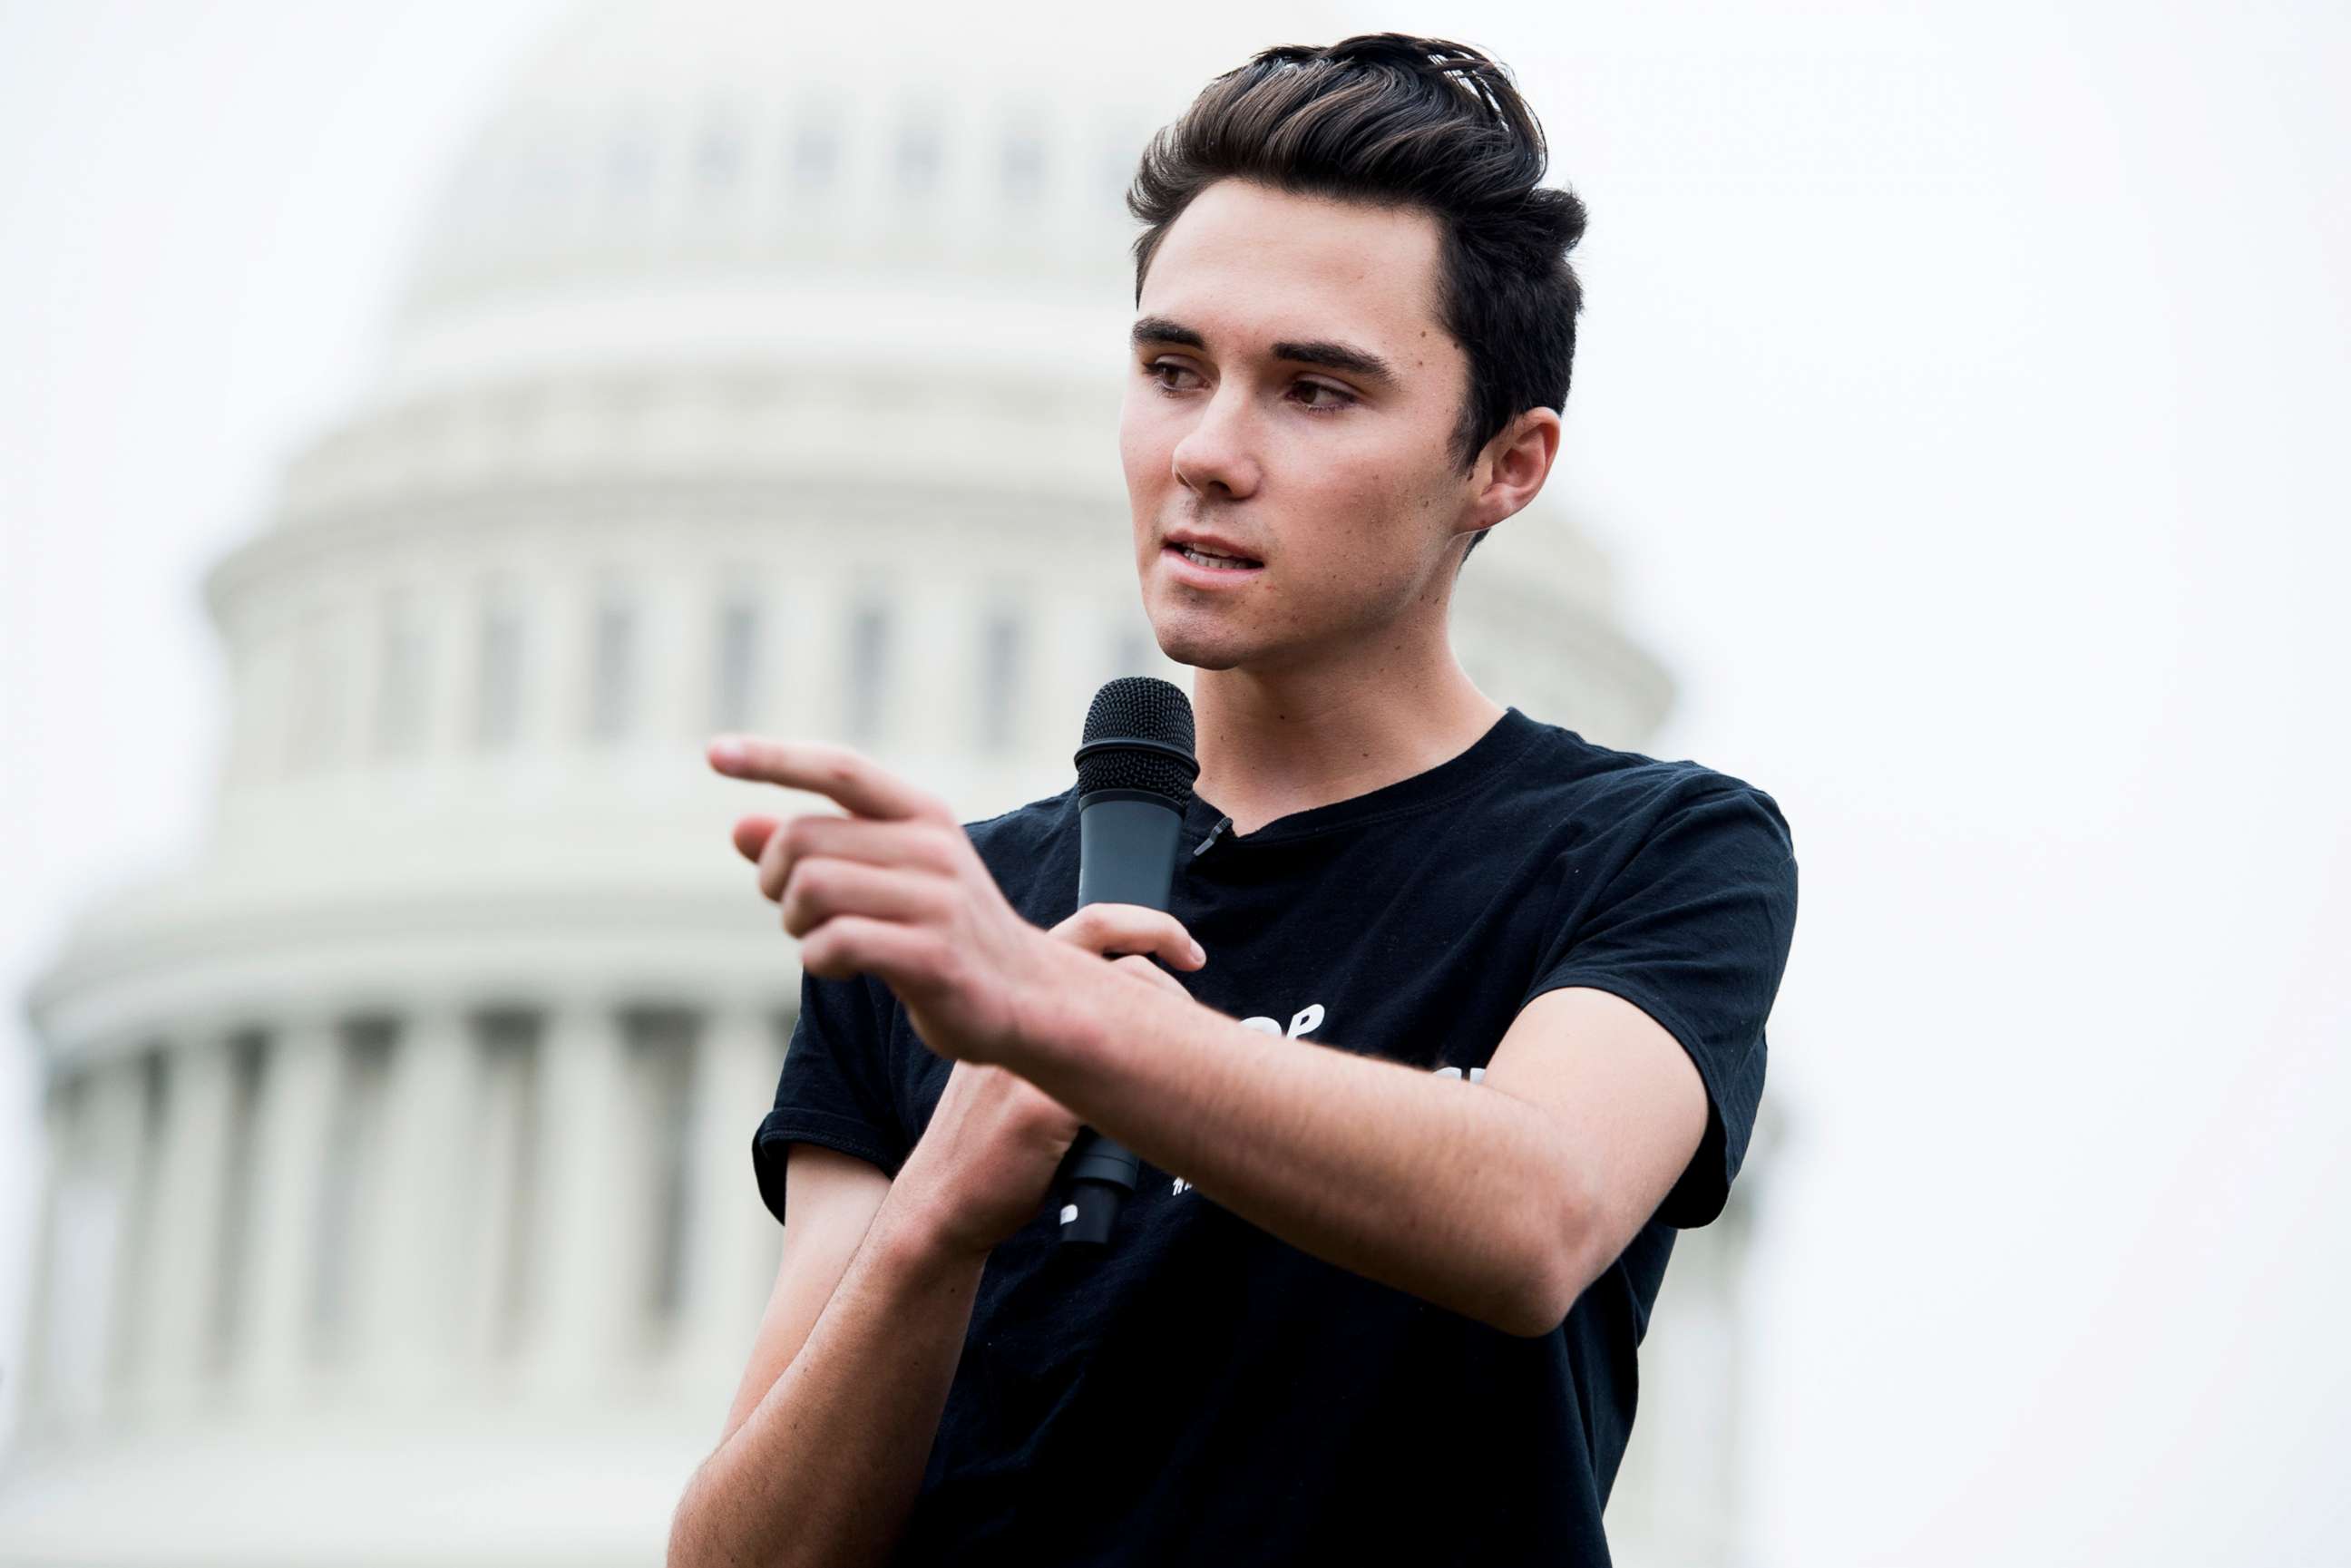 PHOTO: David Hogg, a survivor of the Marjory Stoneman Douglas High School shooting in Parkland, Fla., speaks on the East Front of the Capitol during a rally, March 25, 2019, Washington, D.C.